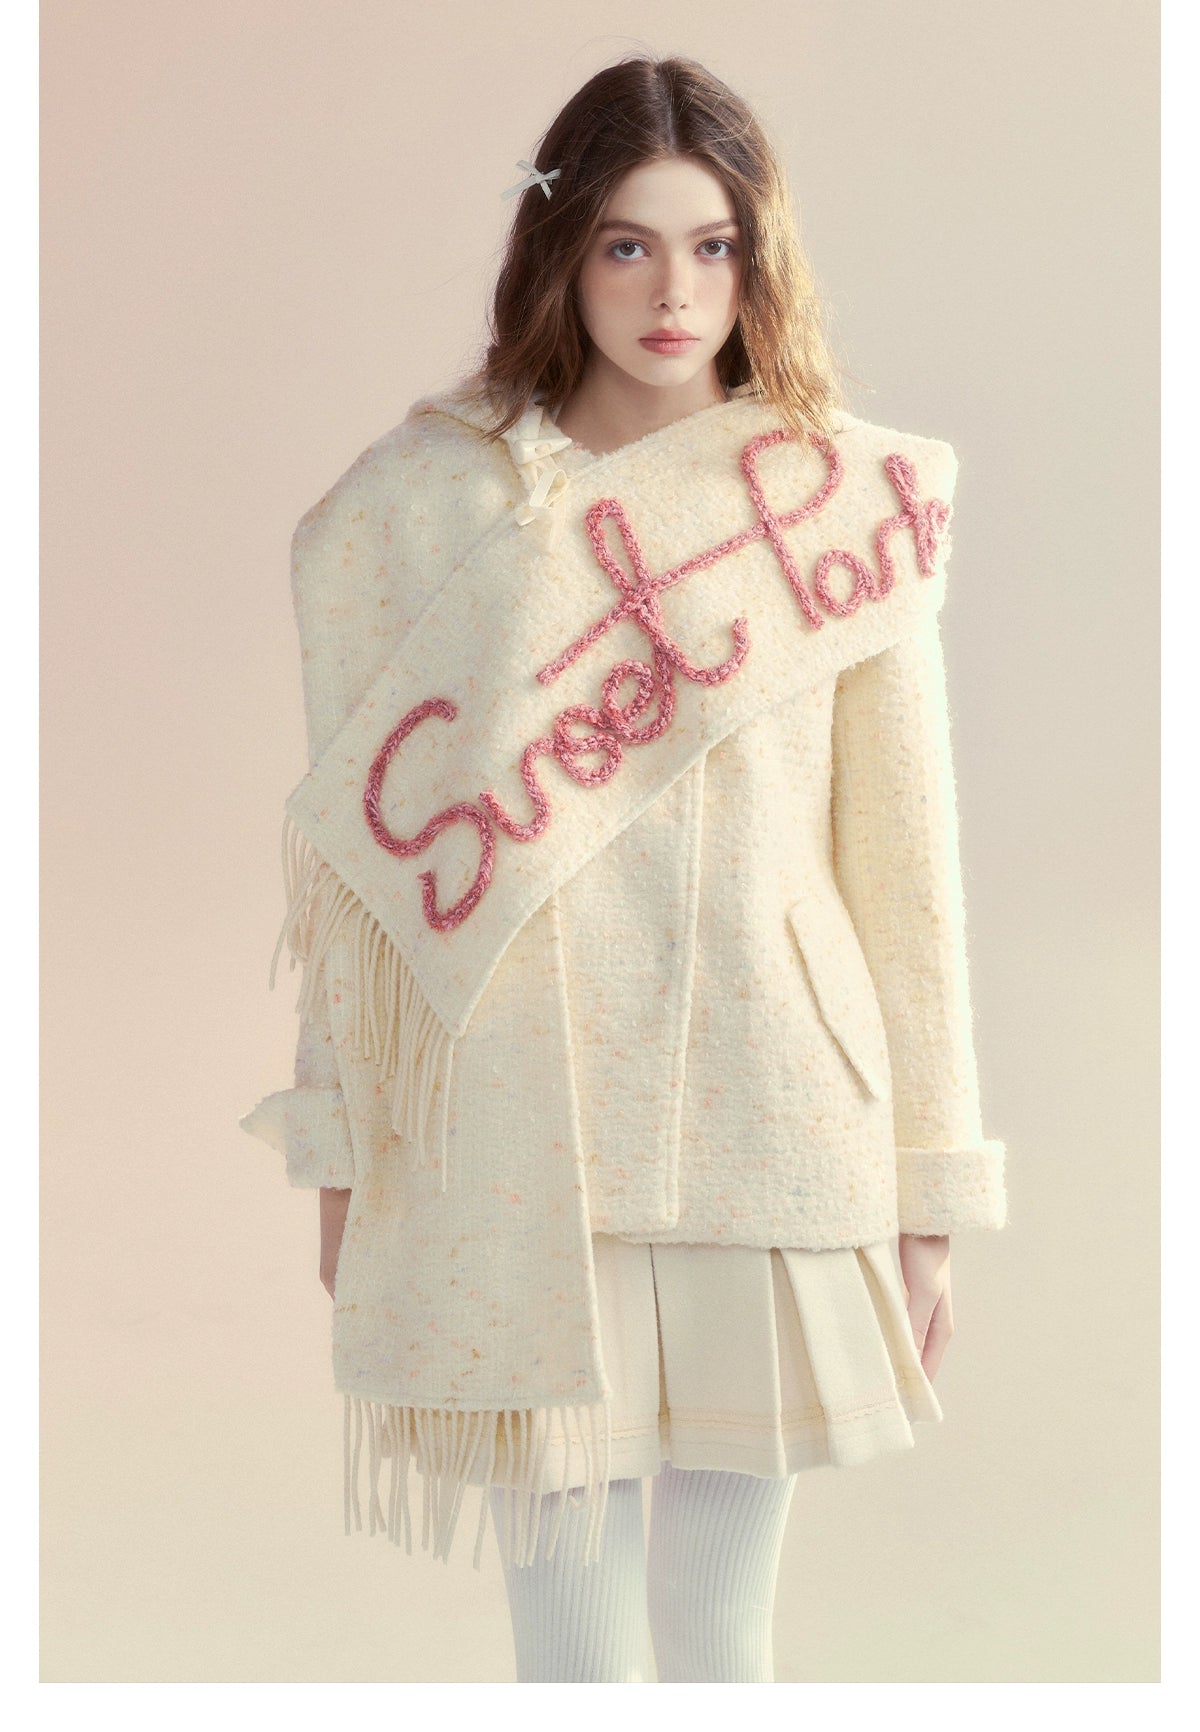 Multicolored Speckled Wool Coat - CHINASQUAD